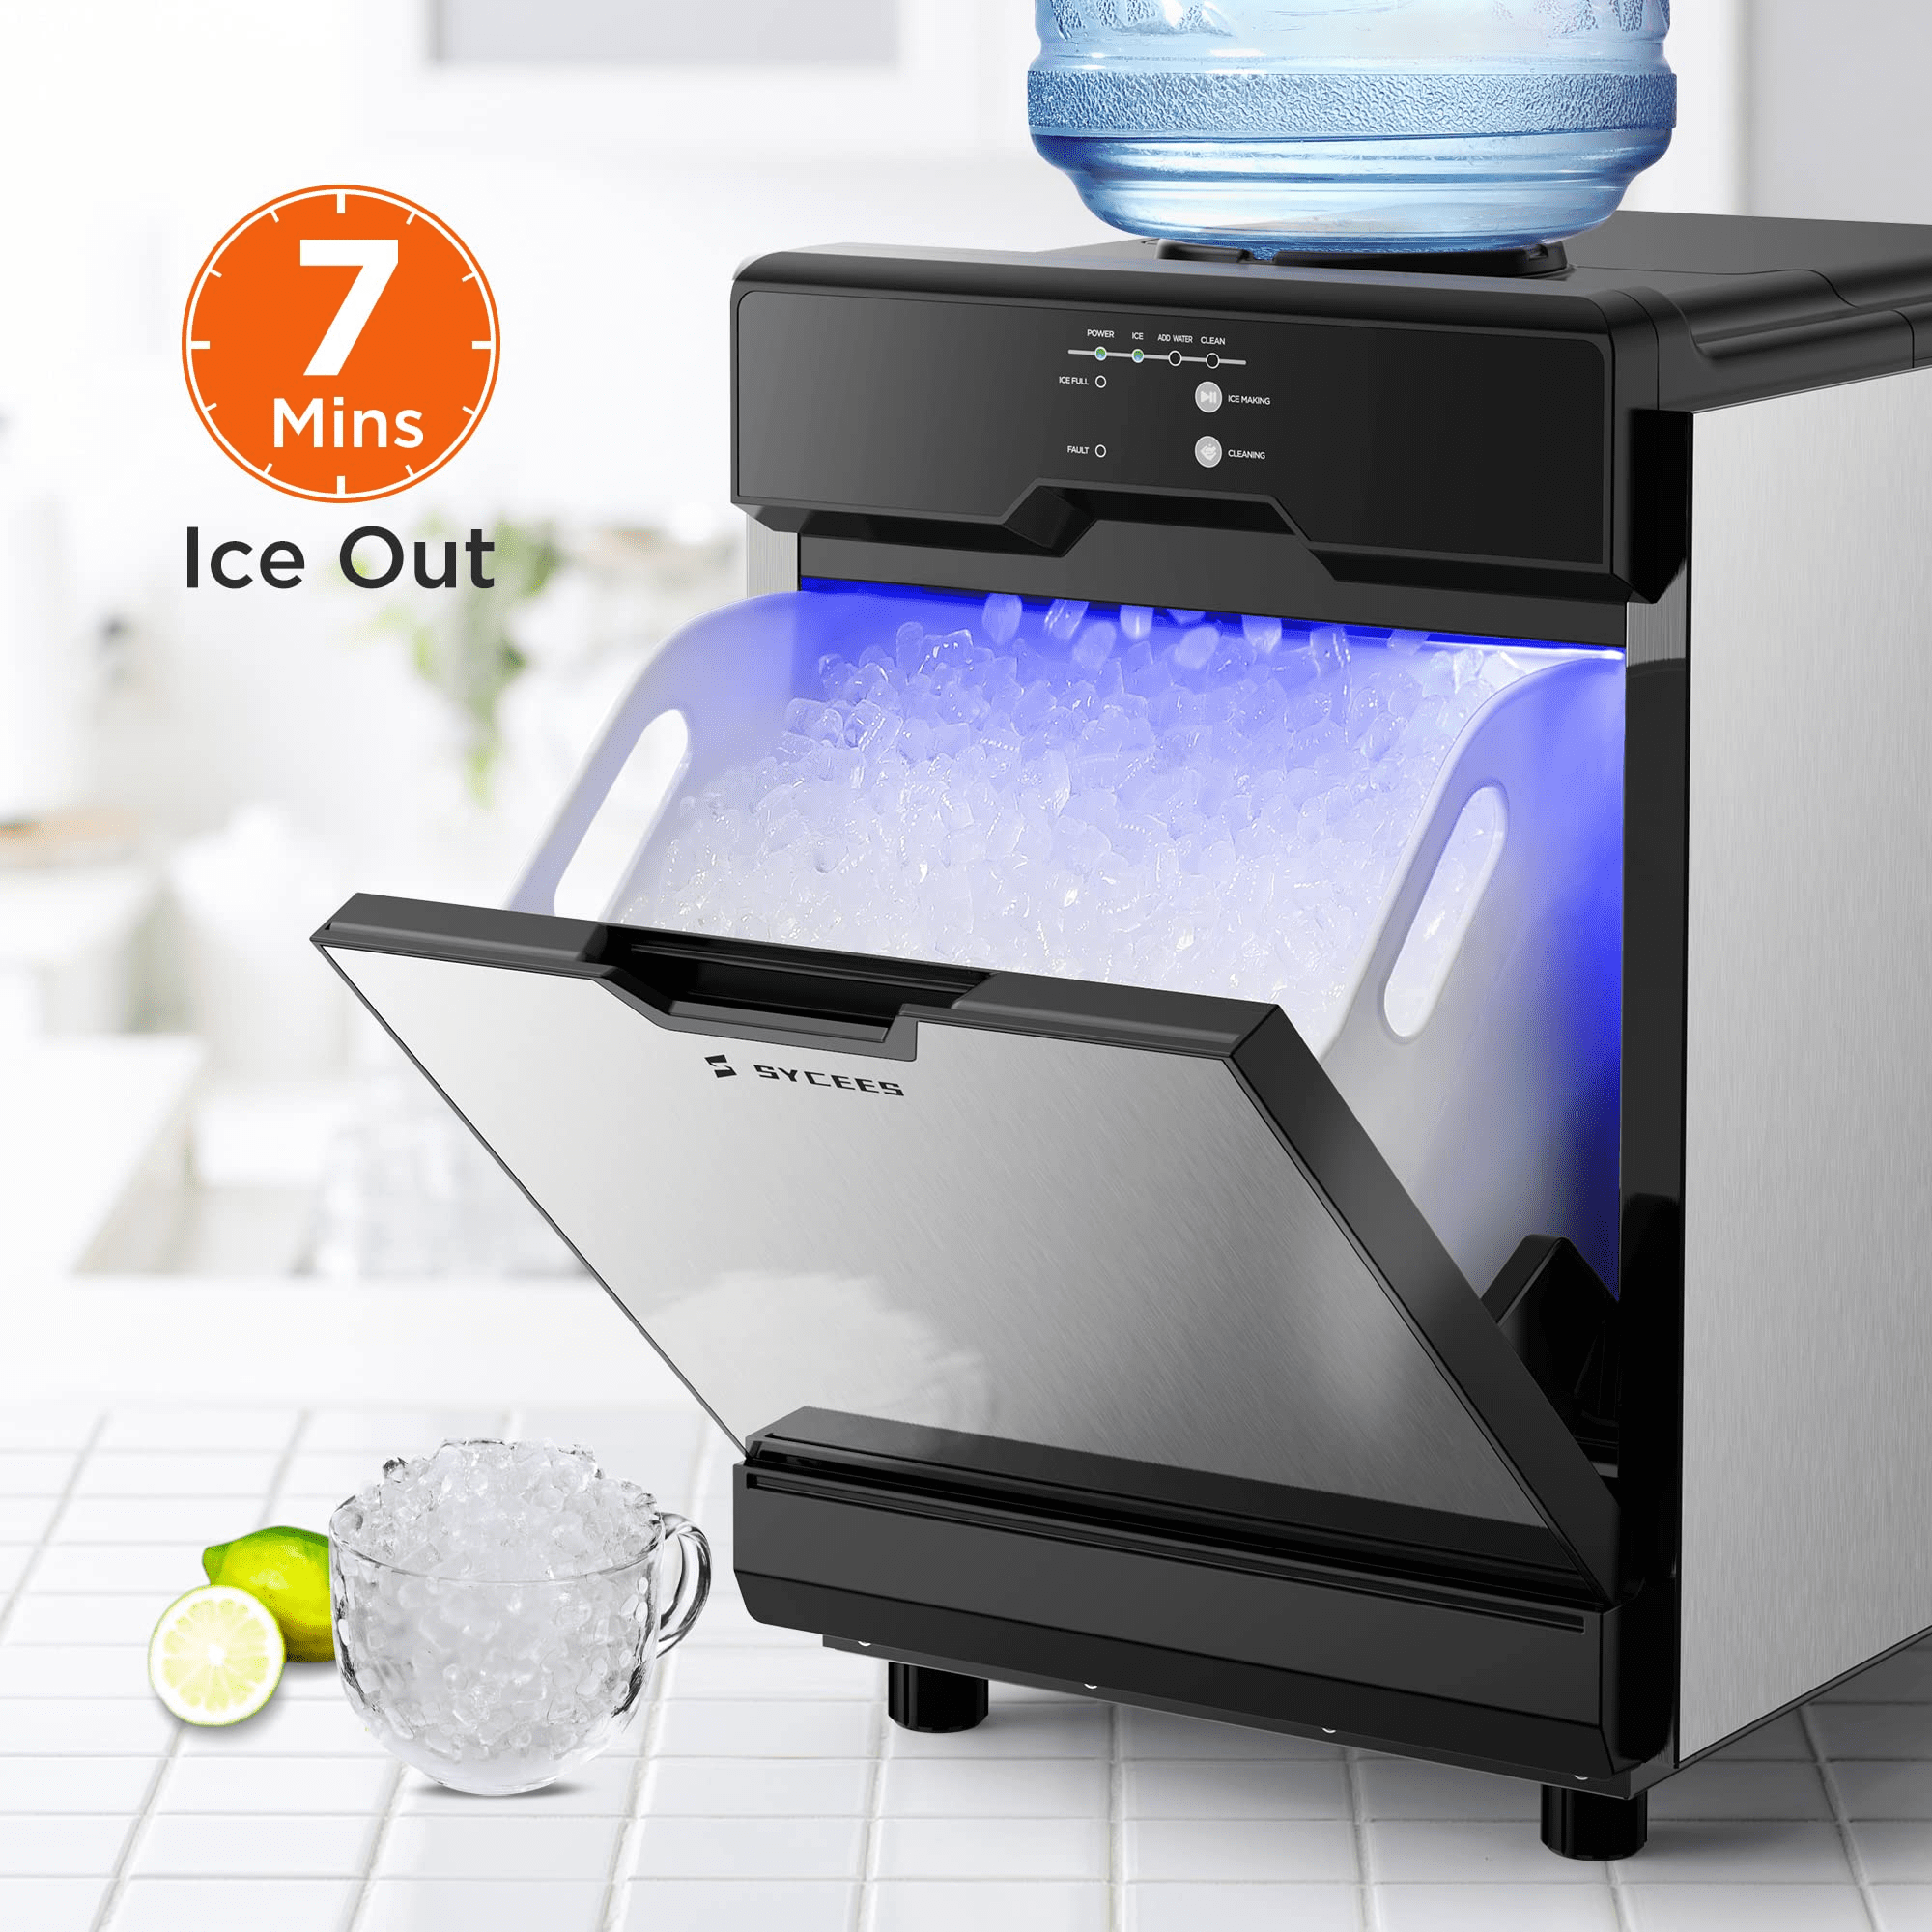 Famistar Portable Countertop Nugget Ice Maker , 55Lbs/24H Sonic Ice Maker,  Quick Ice in 7 Mins, 2 Water Inlet Modes, Self-Cleaning, Chewable Nugget